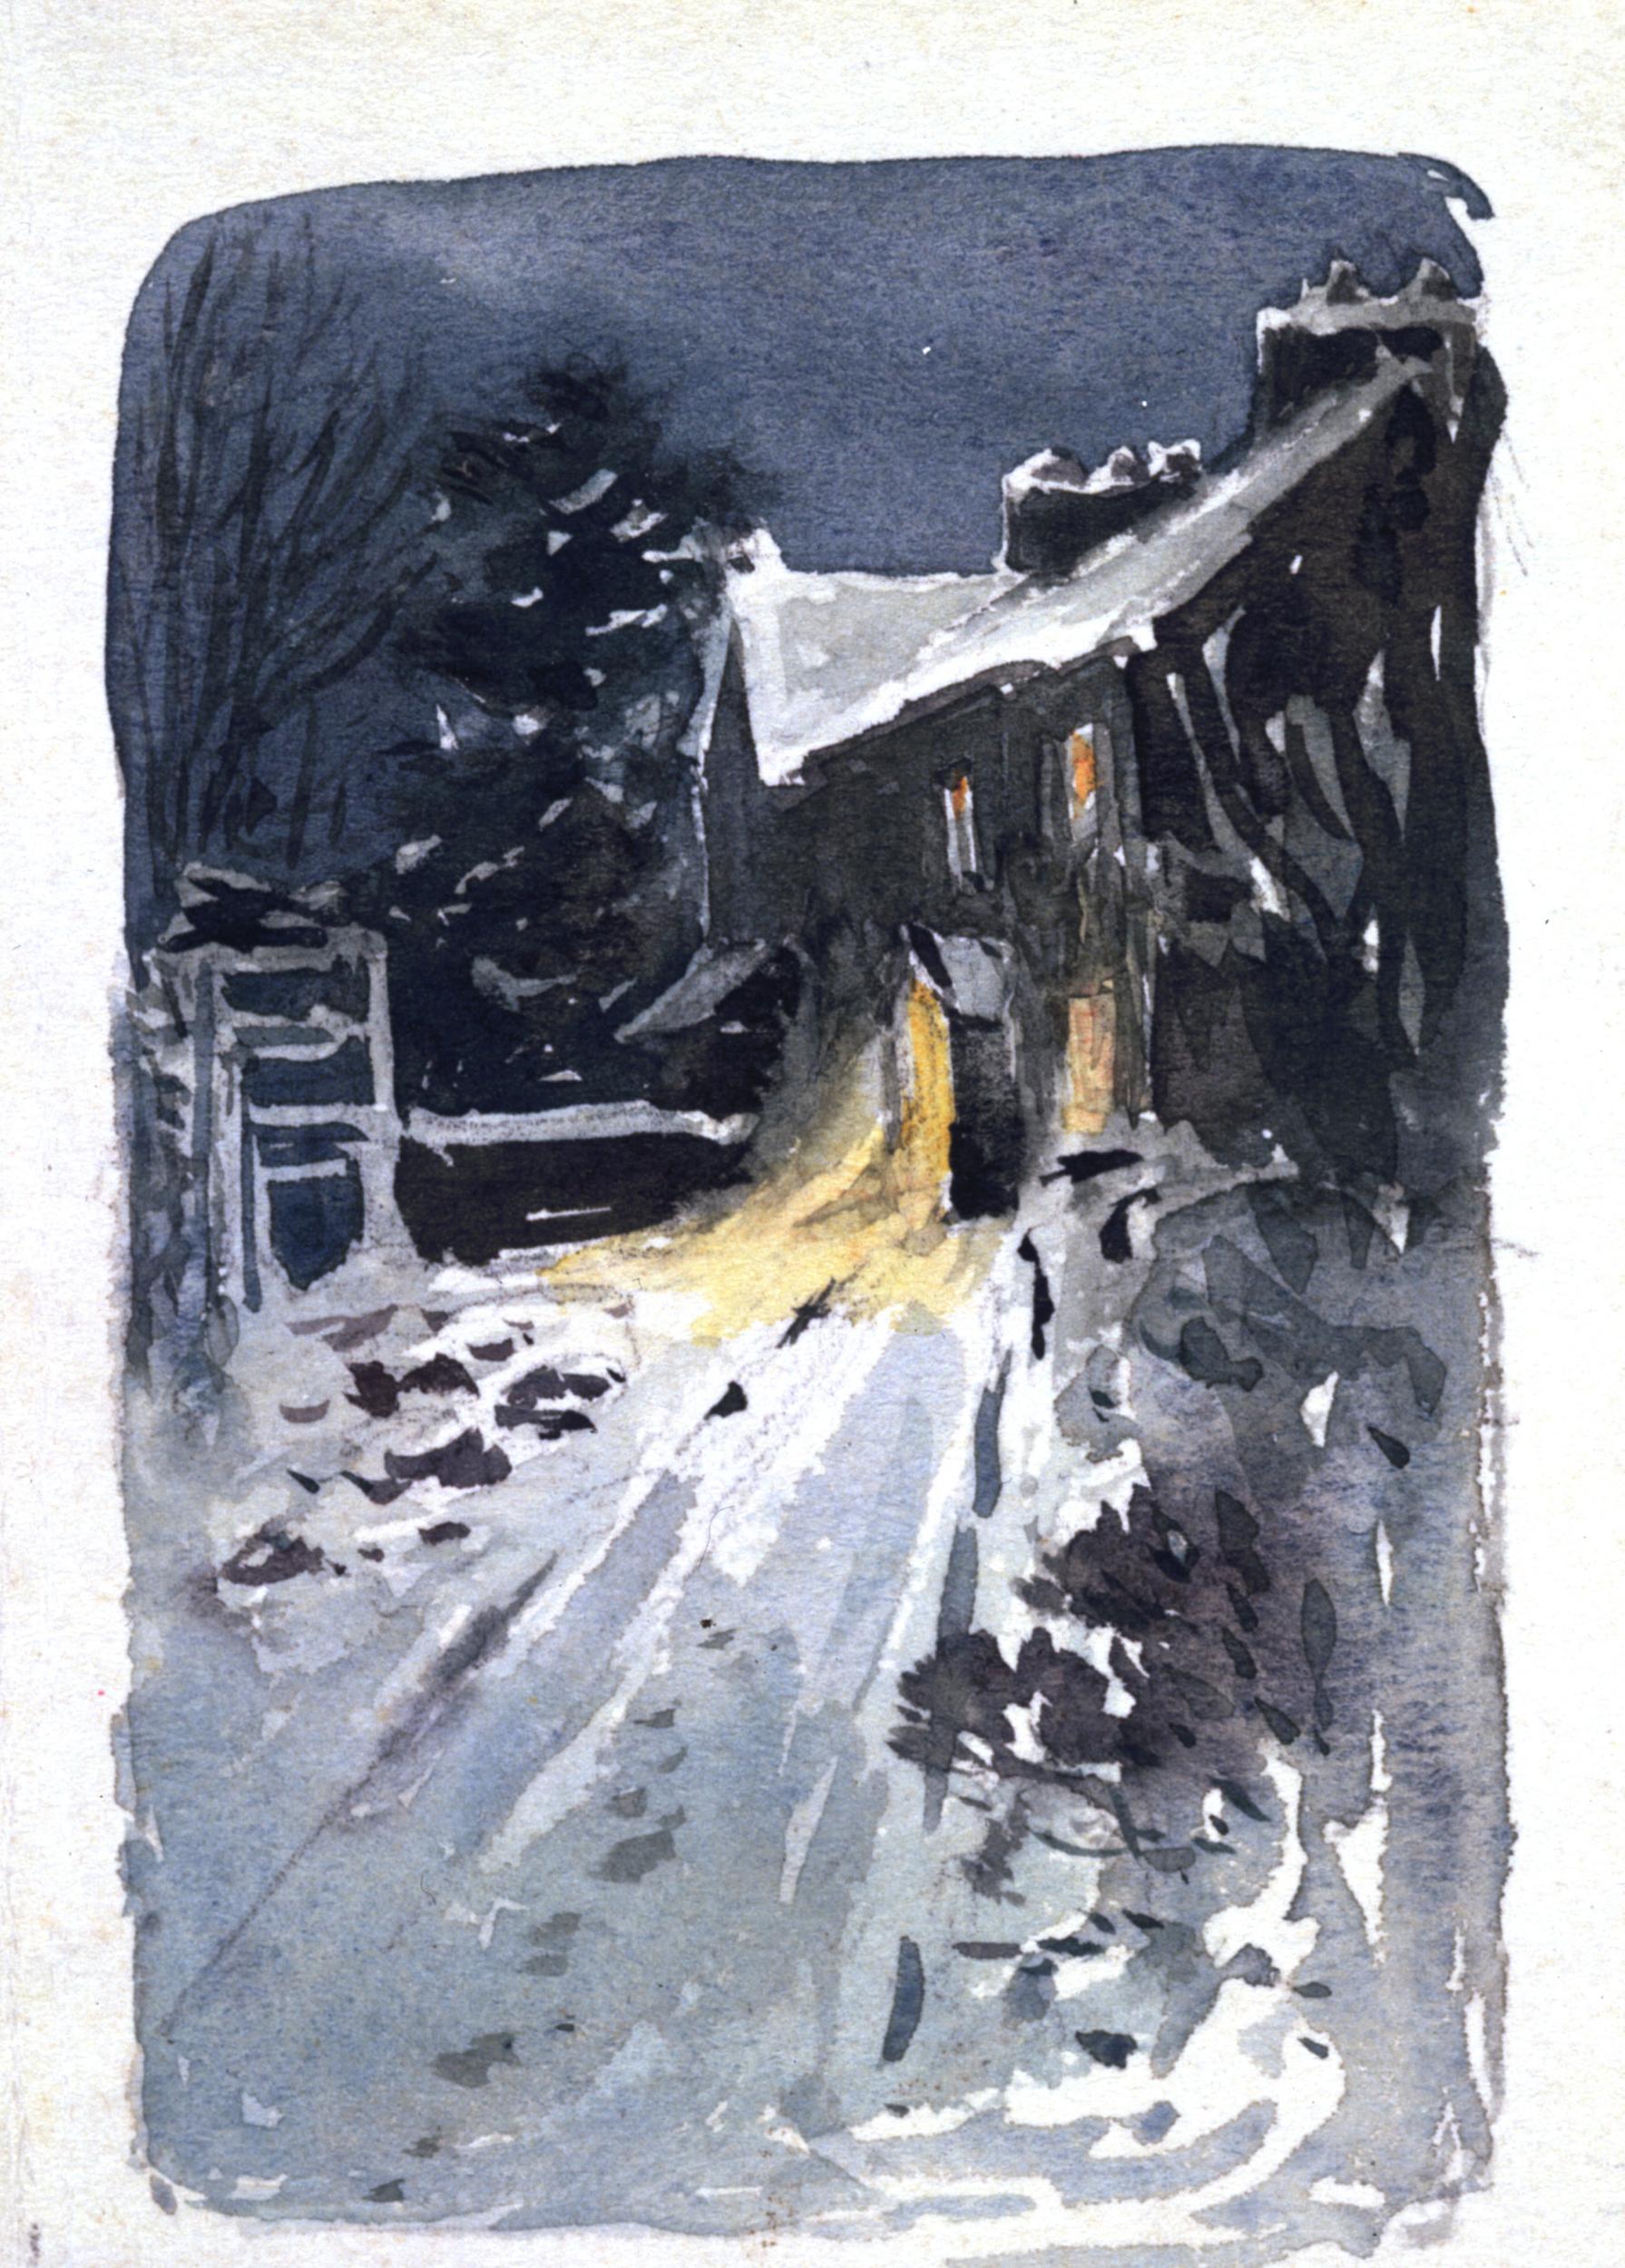 Hill Top by night, Beatrix Potter, 1913, BP.294